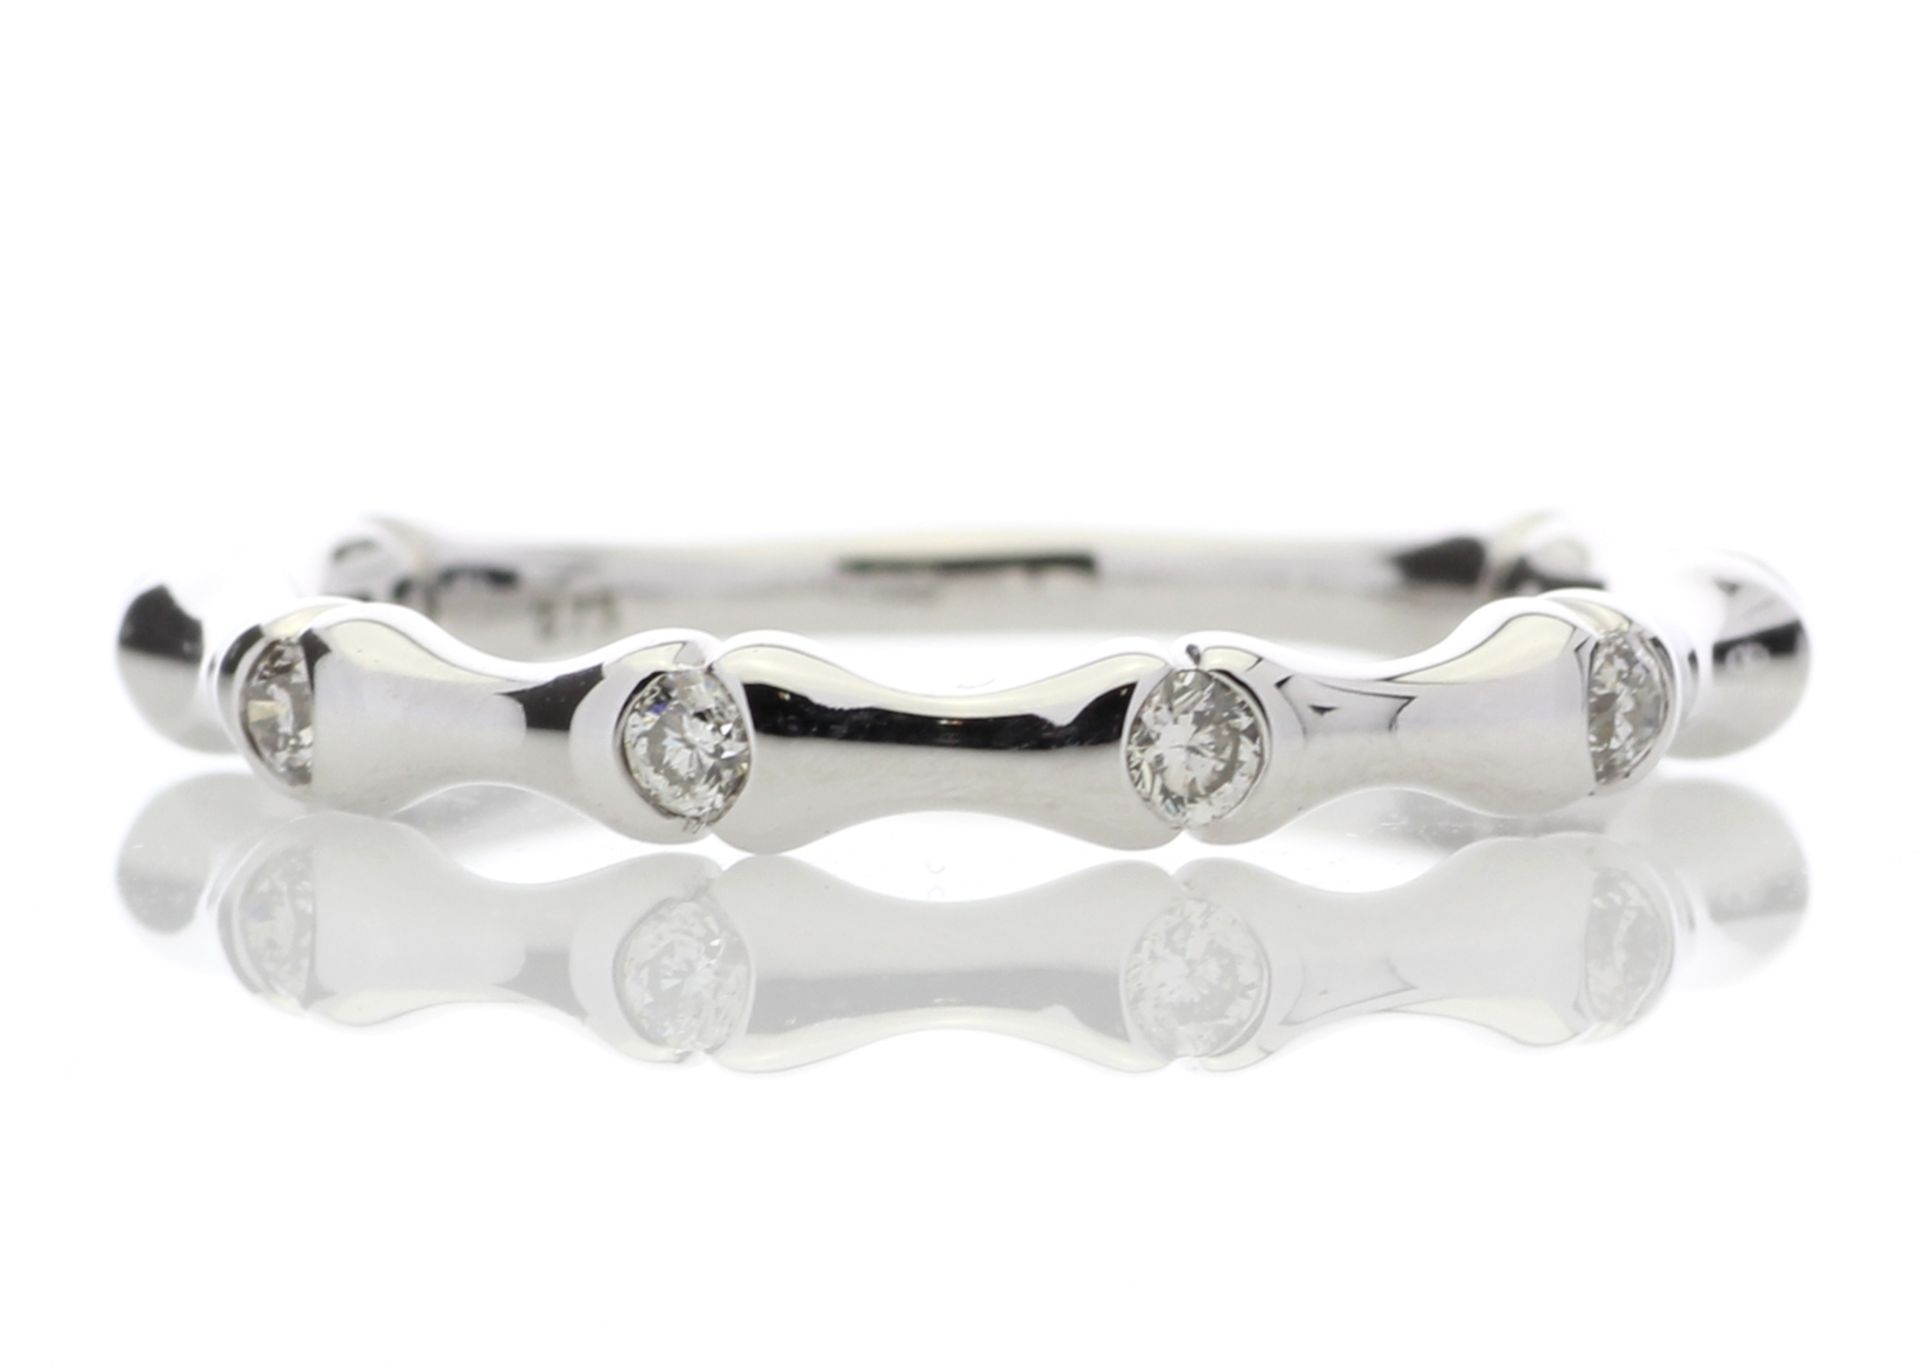 9ct White Gold Diamond Ring 0.12 Carats - Valued by GIE £1,970.00 - Beautiful in its simplicity